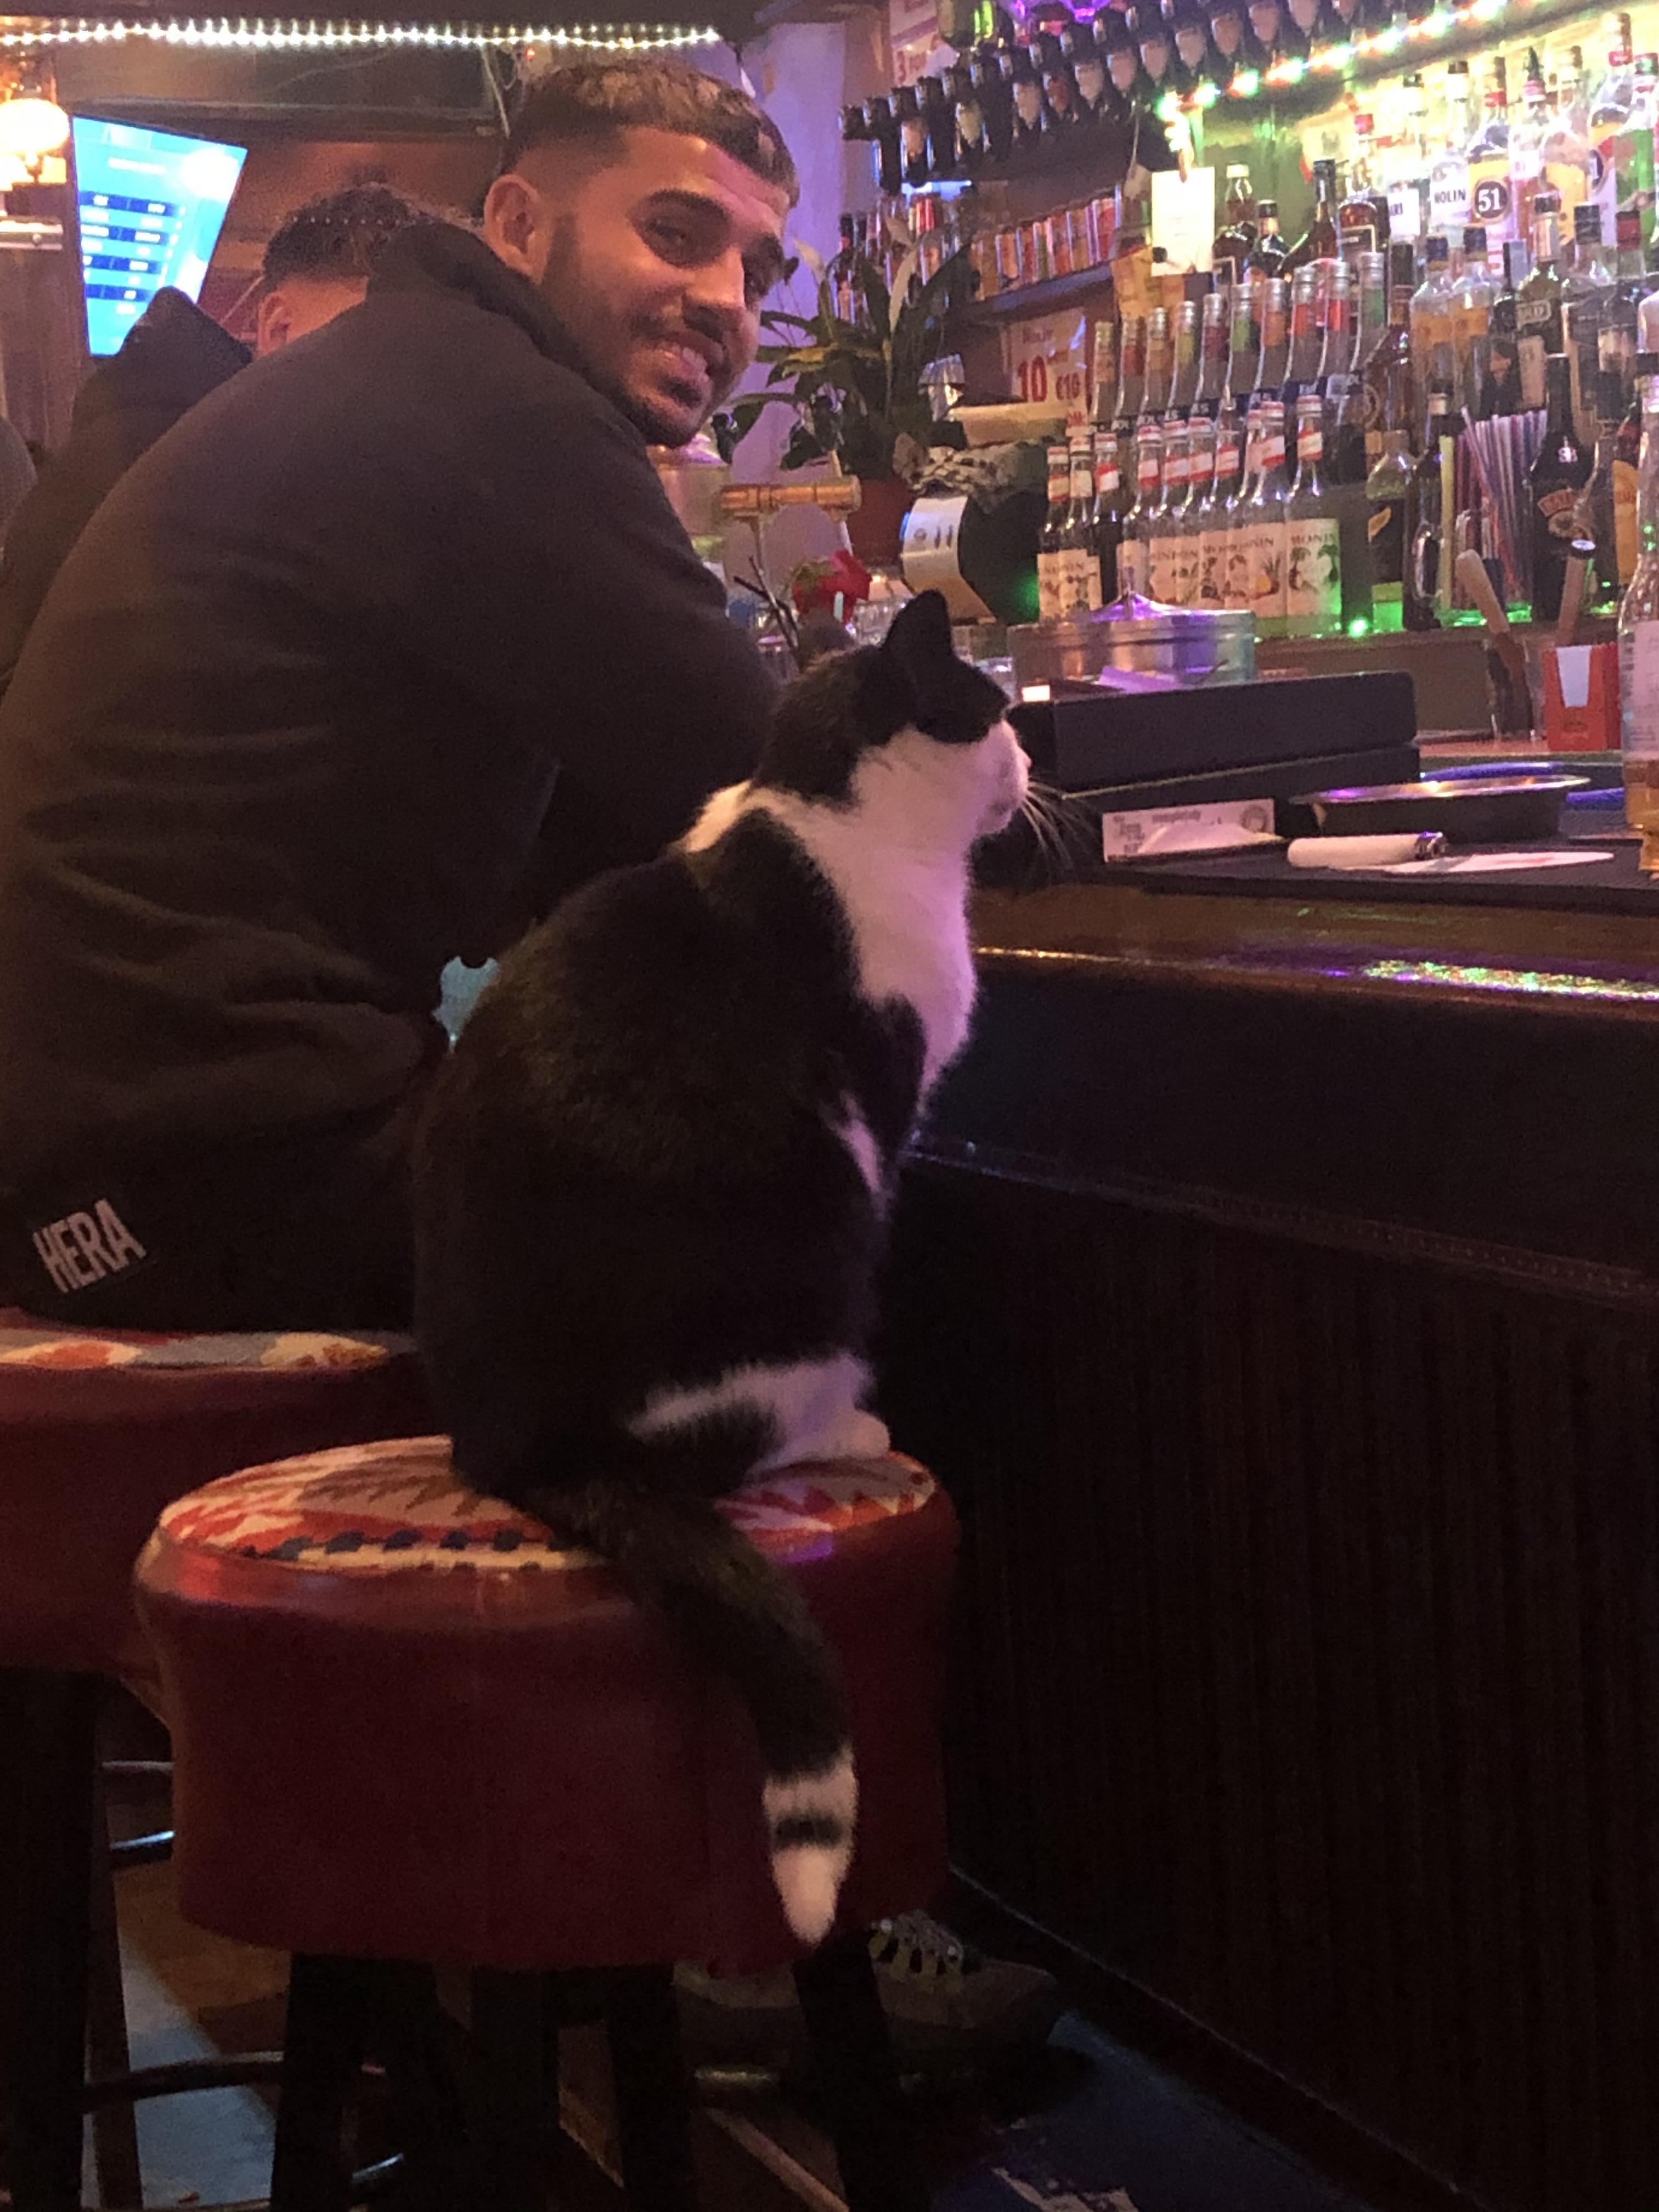 Just casually smoking and drinking at Wonder Bar in Amsterdam tonight and I look to my right and see this cat chilling at the bar waiting for a drink.